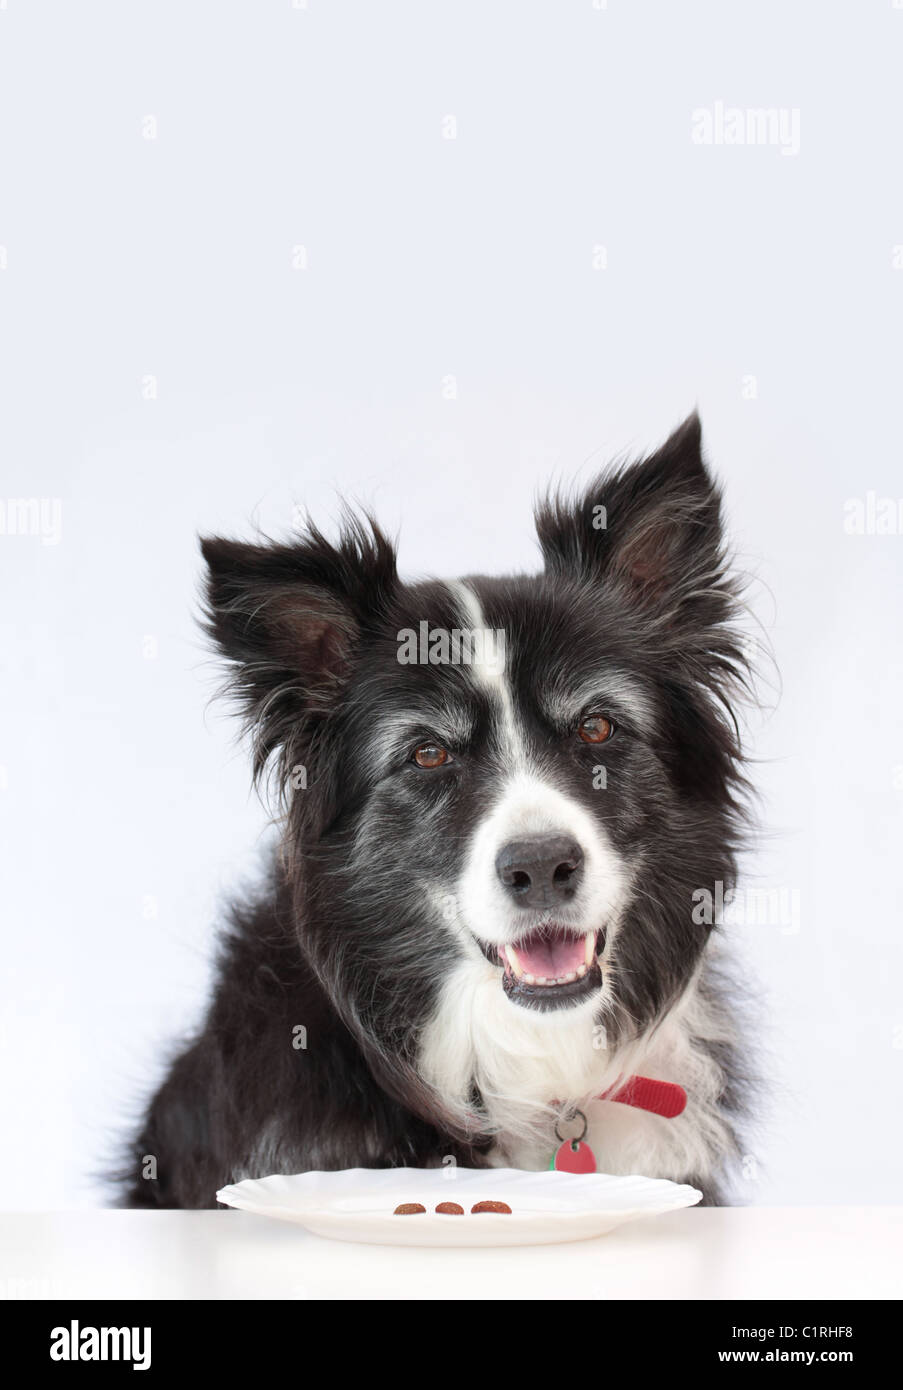 Dog Happy to be on a Diet Stock Photo